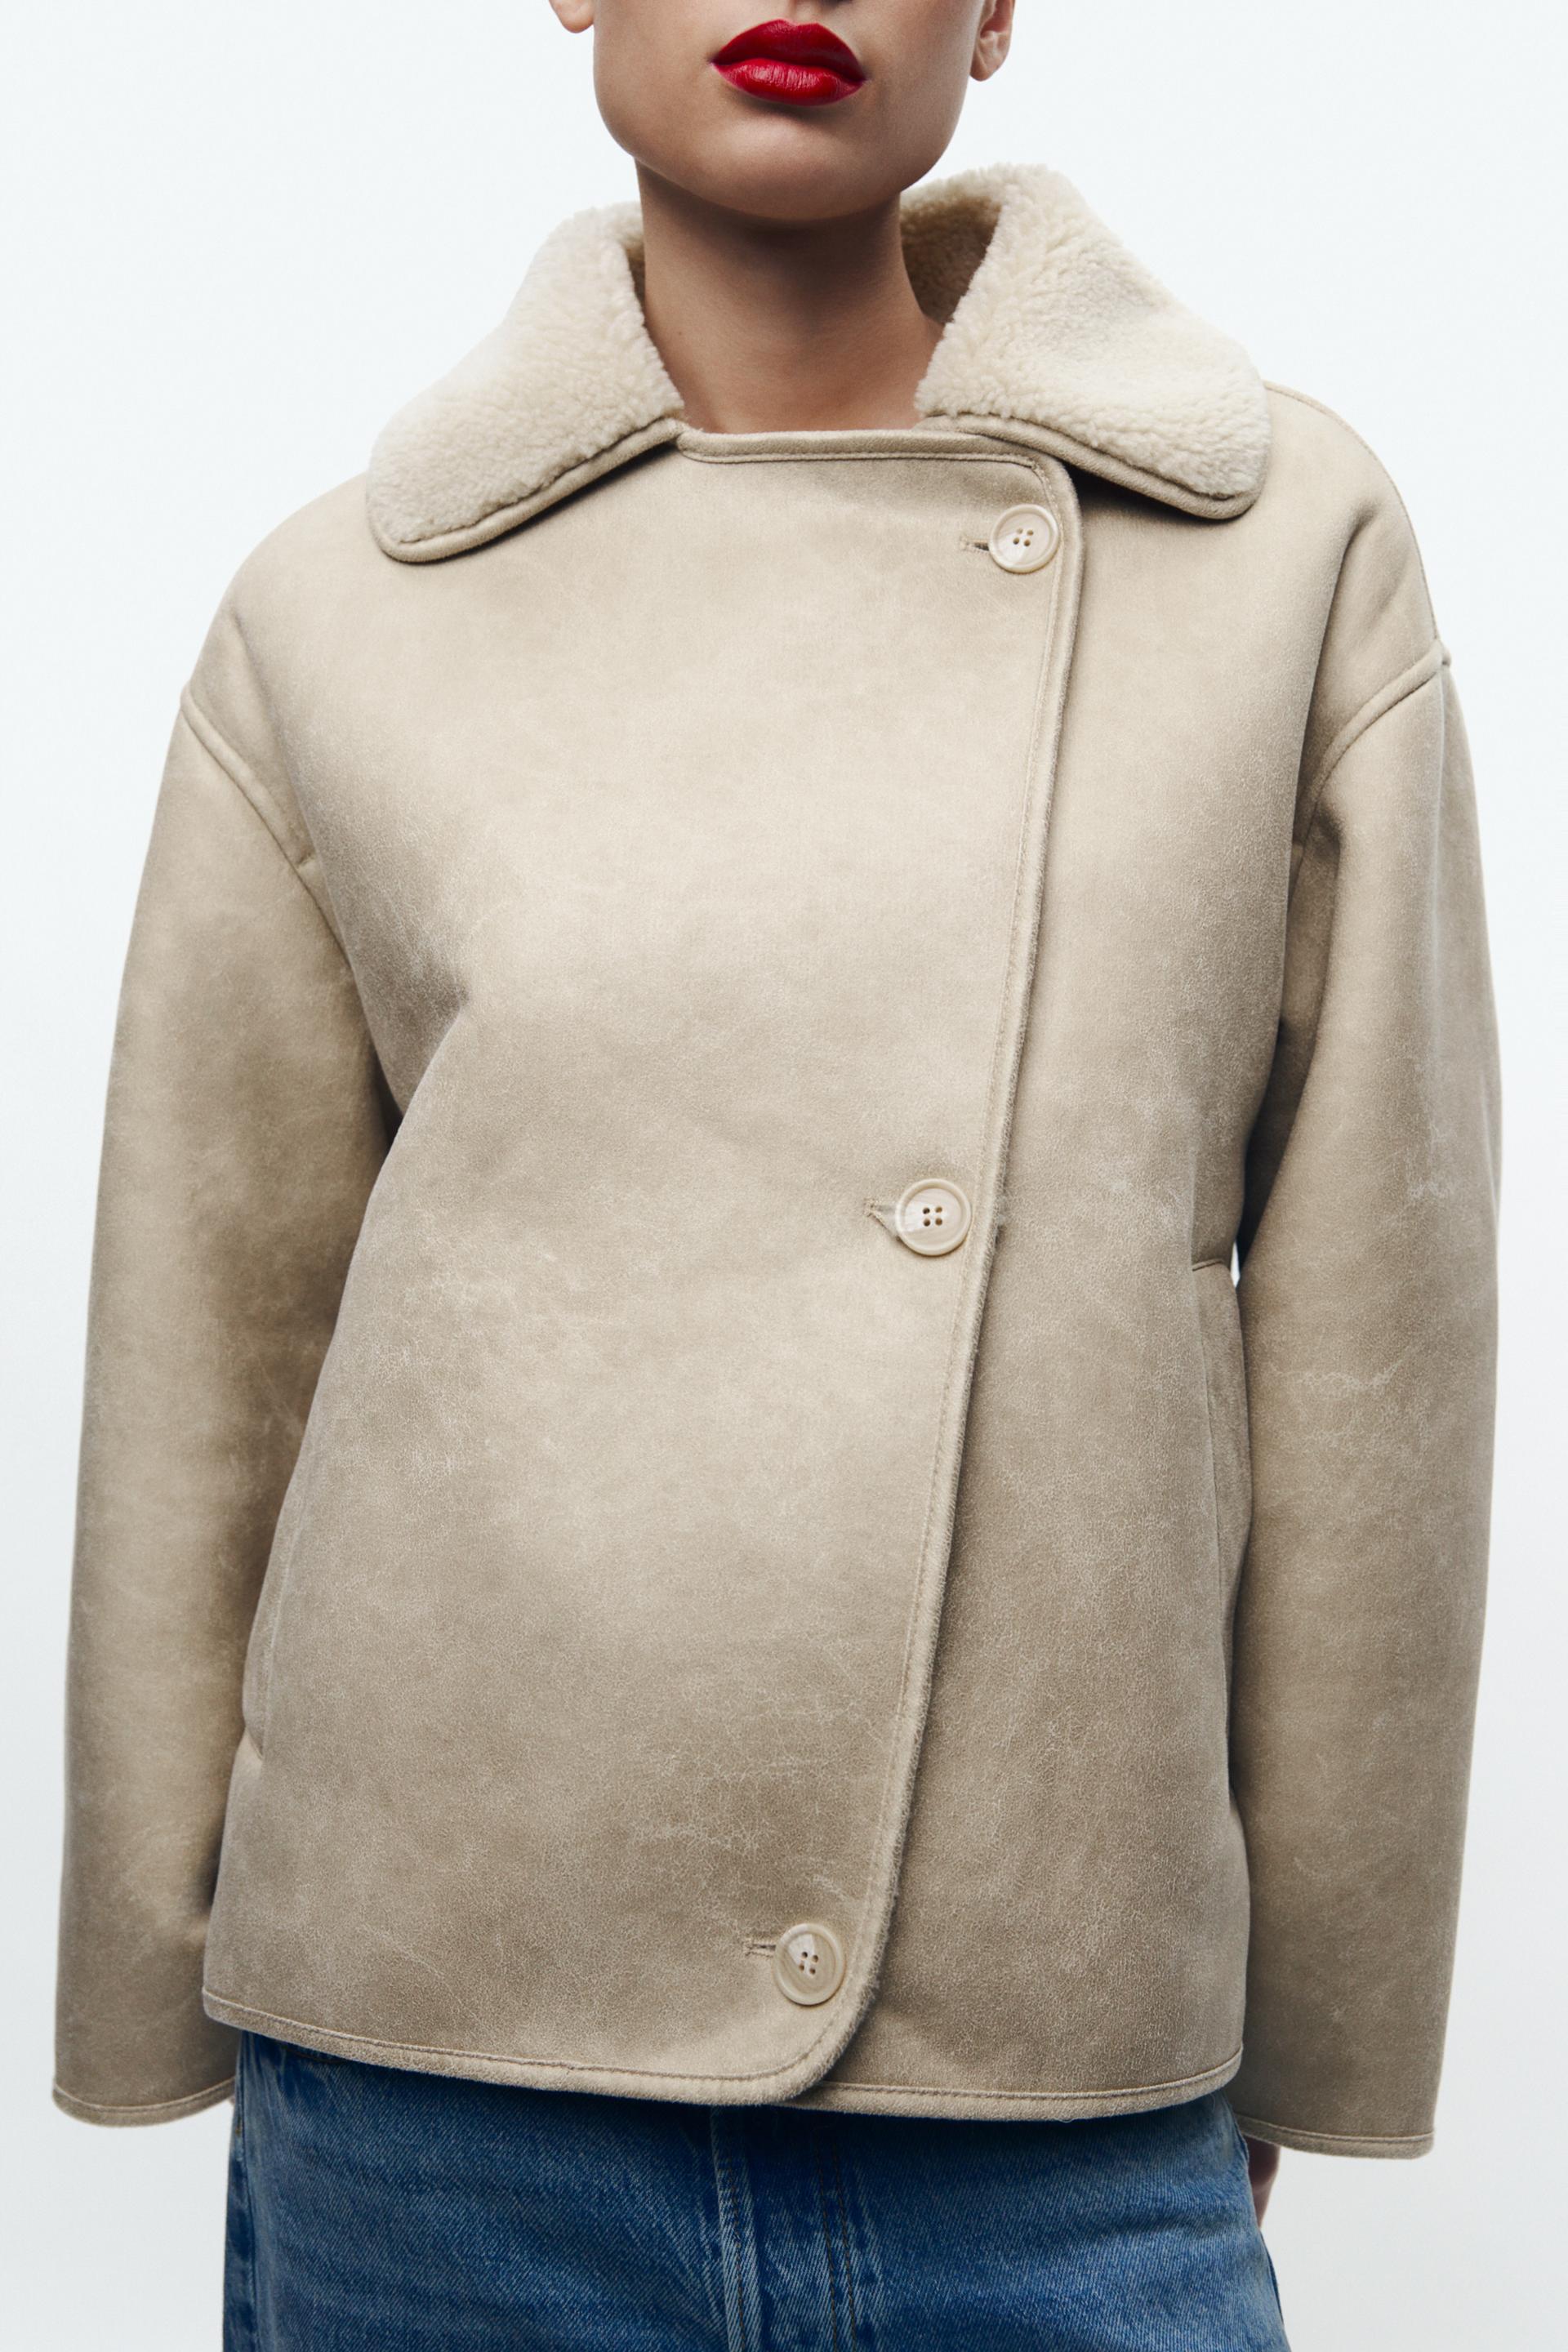 ZARA NEW ZW COLLECTION RELAXED FIT DOUBLE-FACED JACKET BEIGE 3548/043  sale!!!!